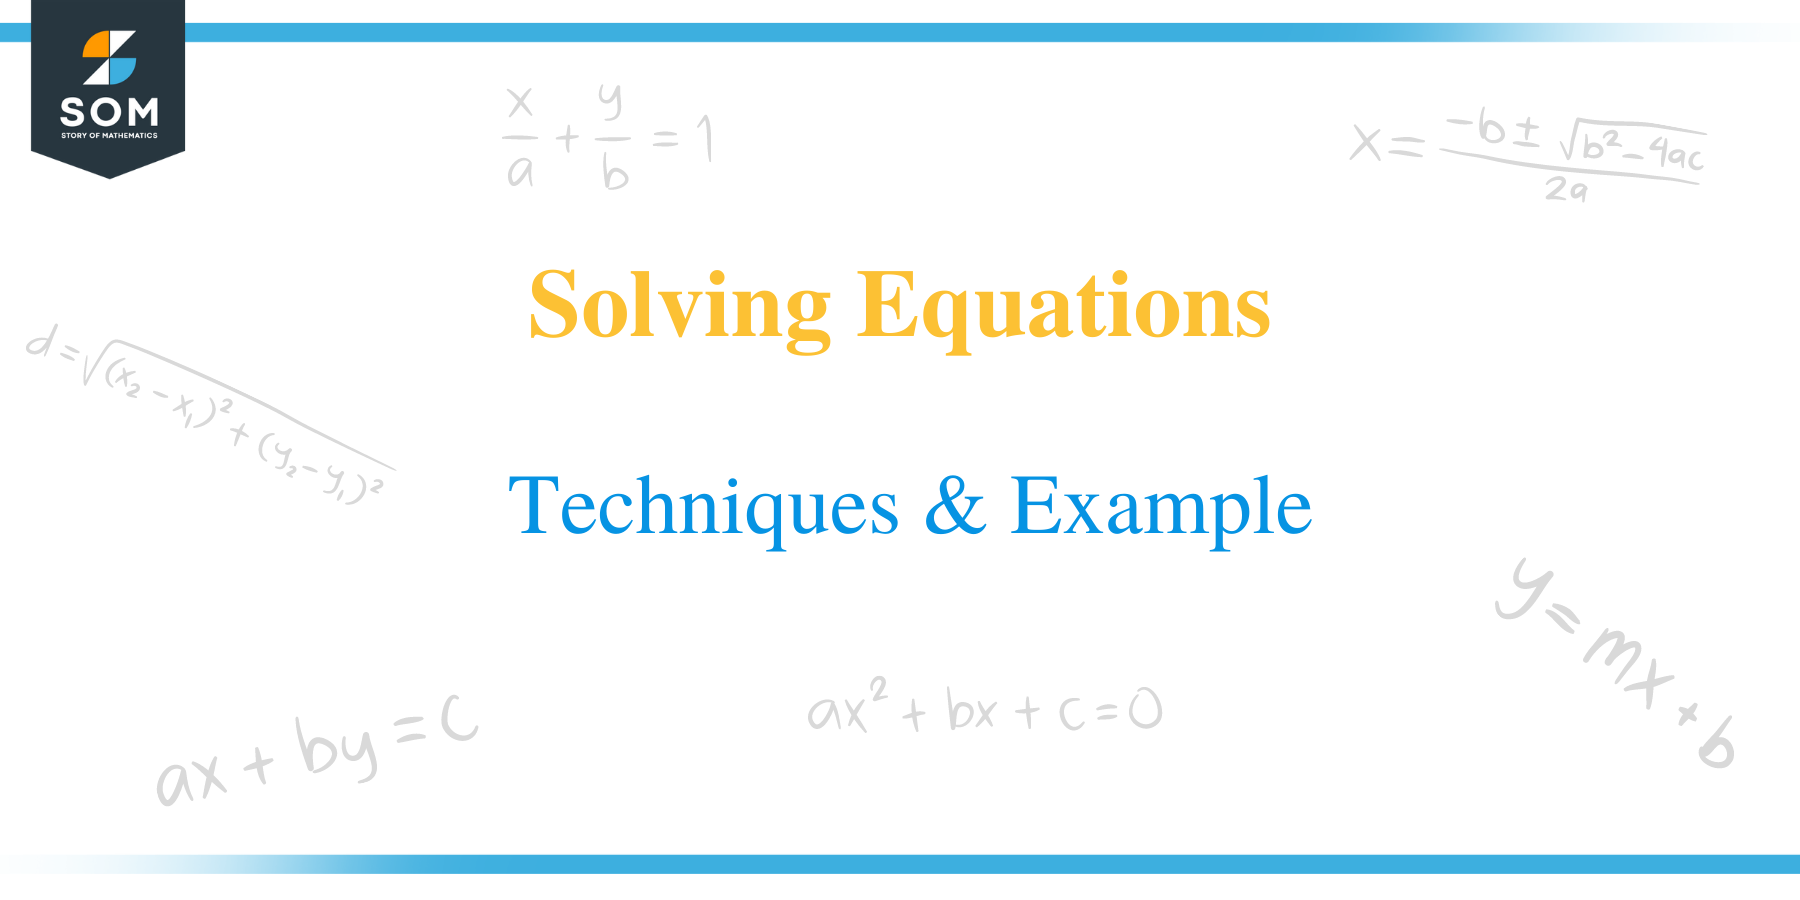 Solving Equation title